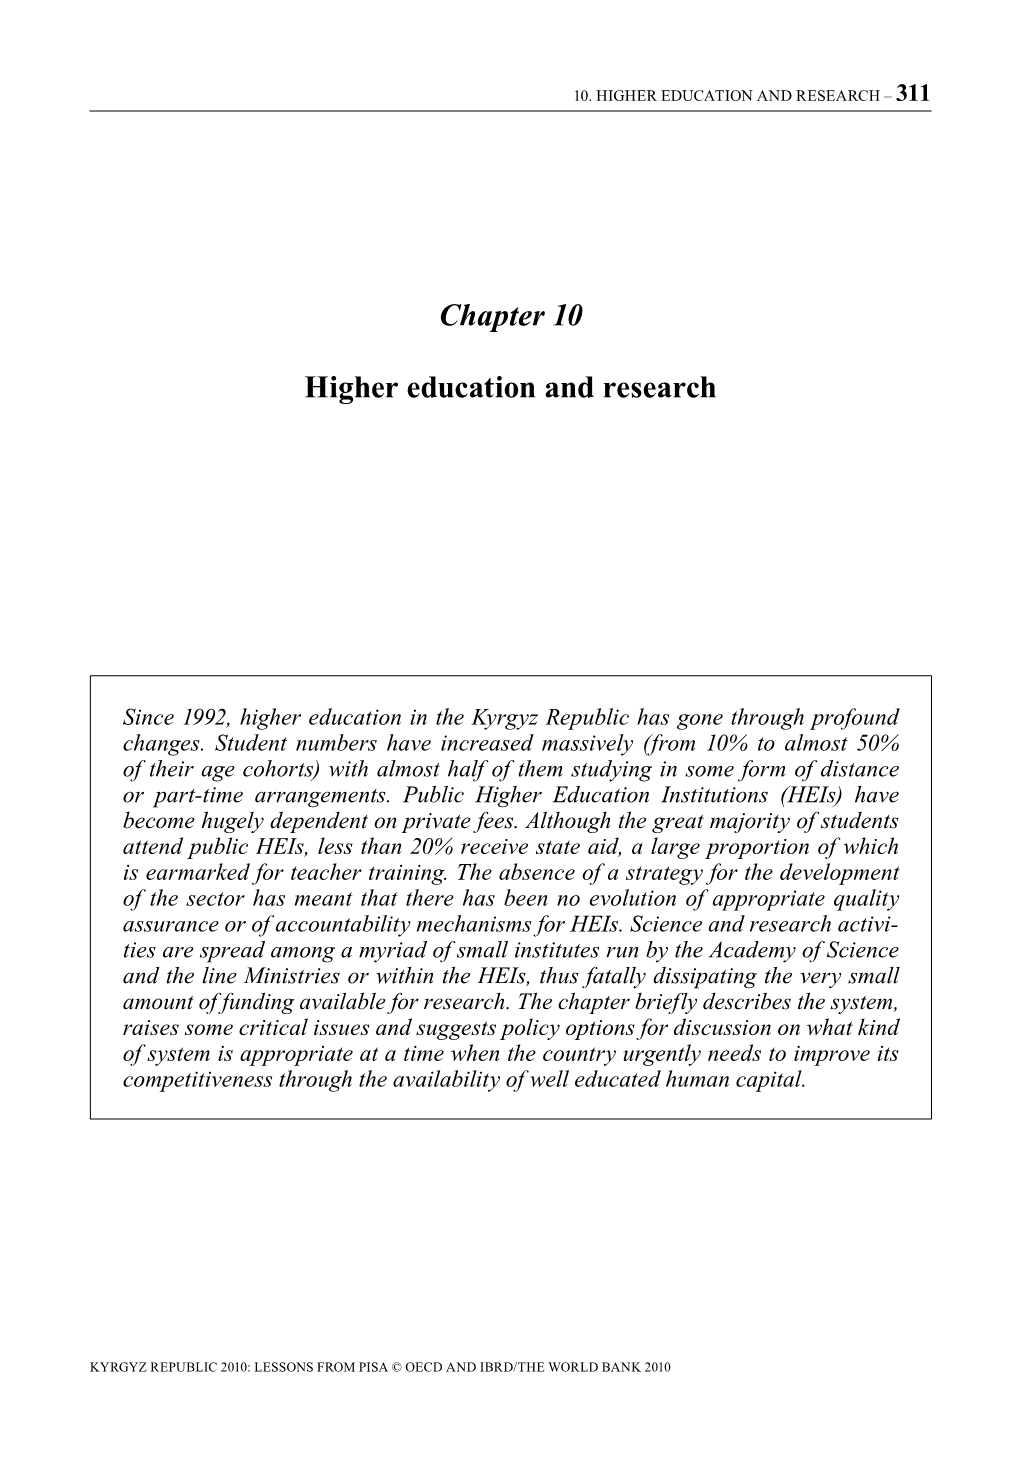 Chapter 10 Higher Education and Research